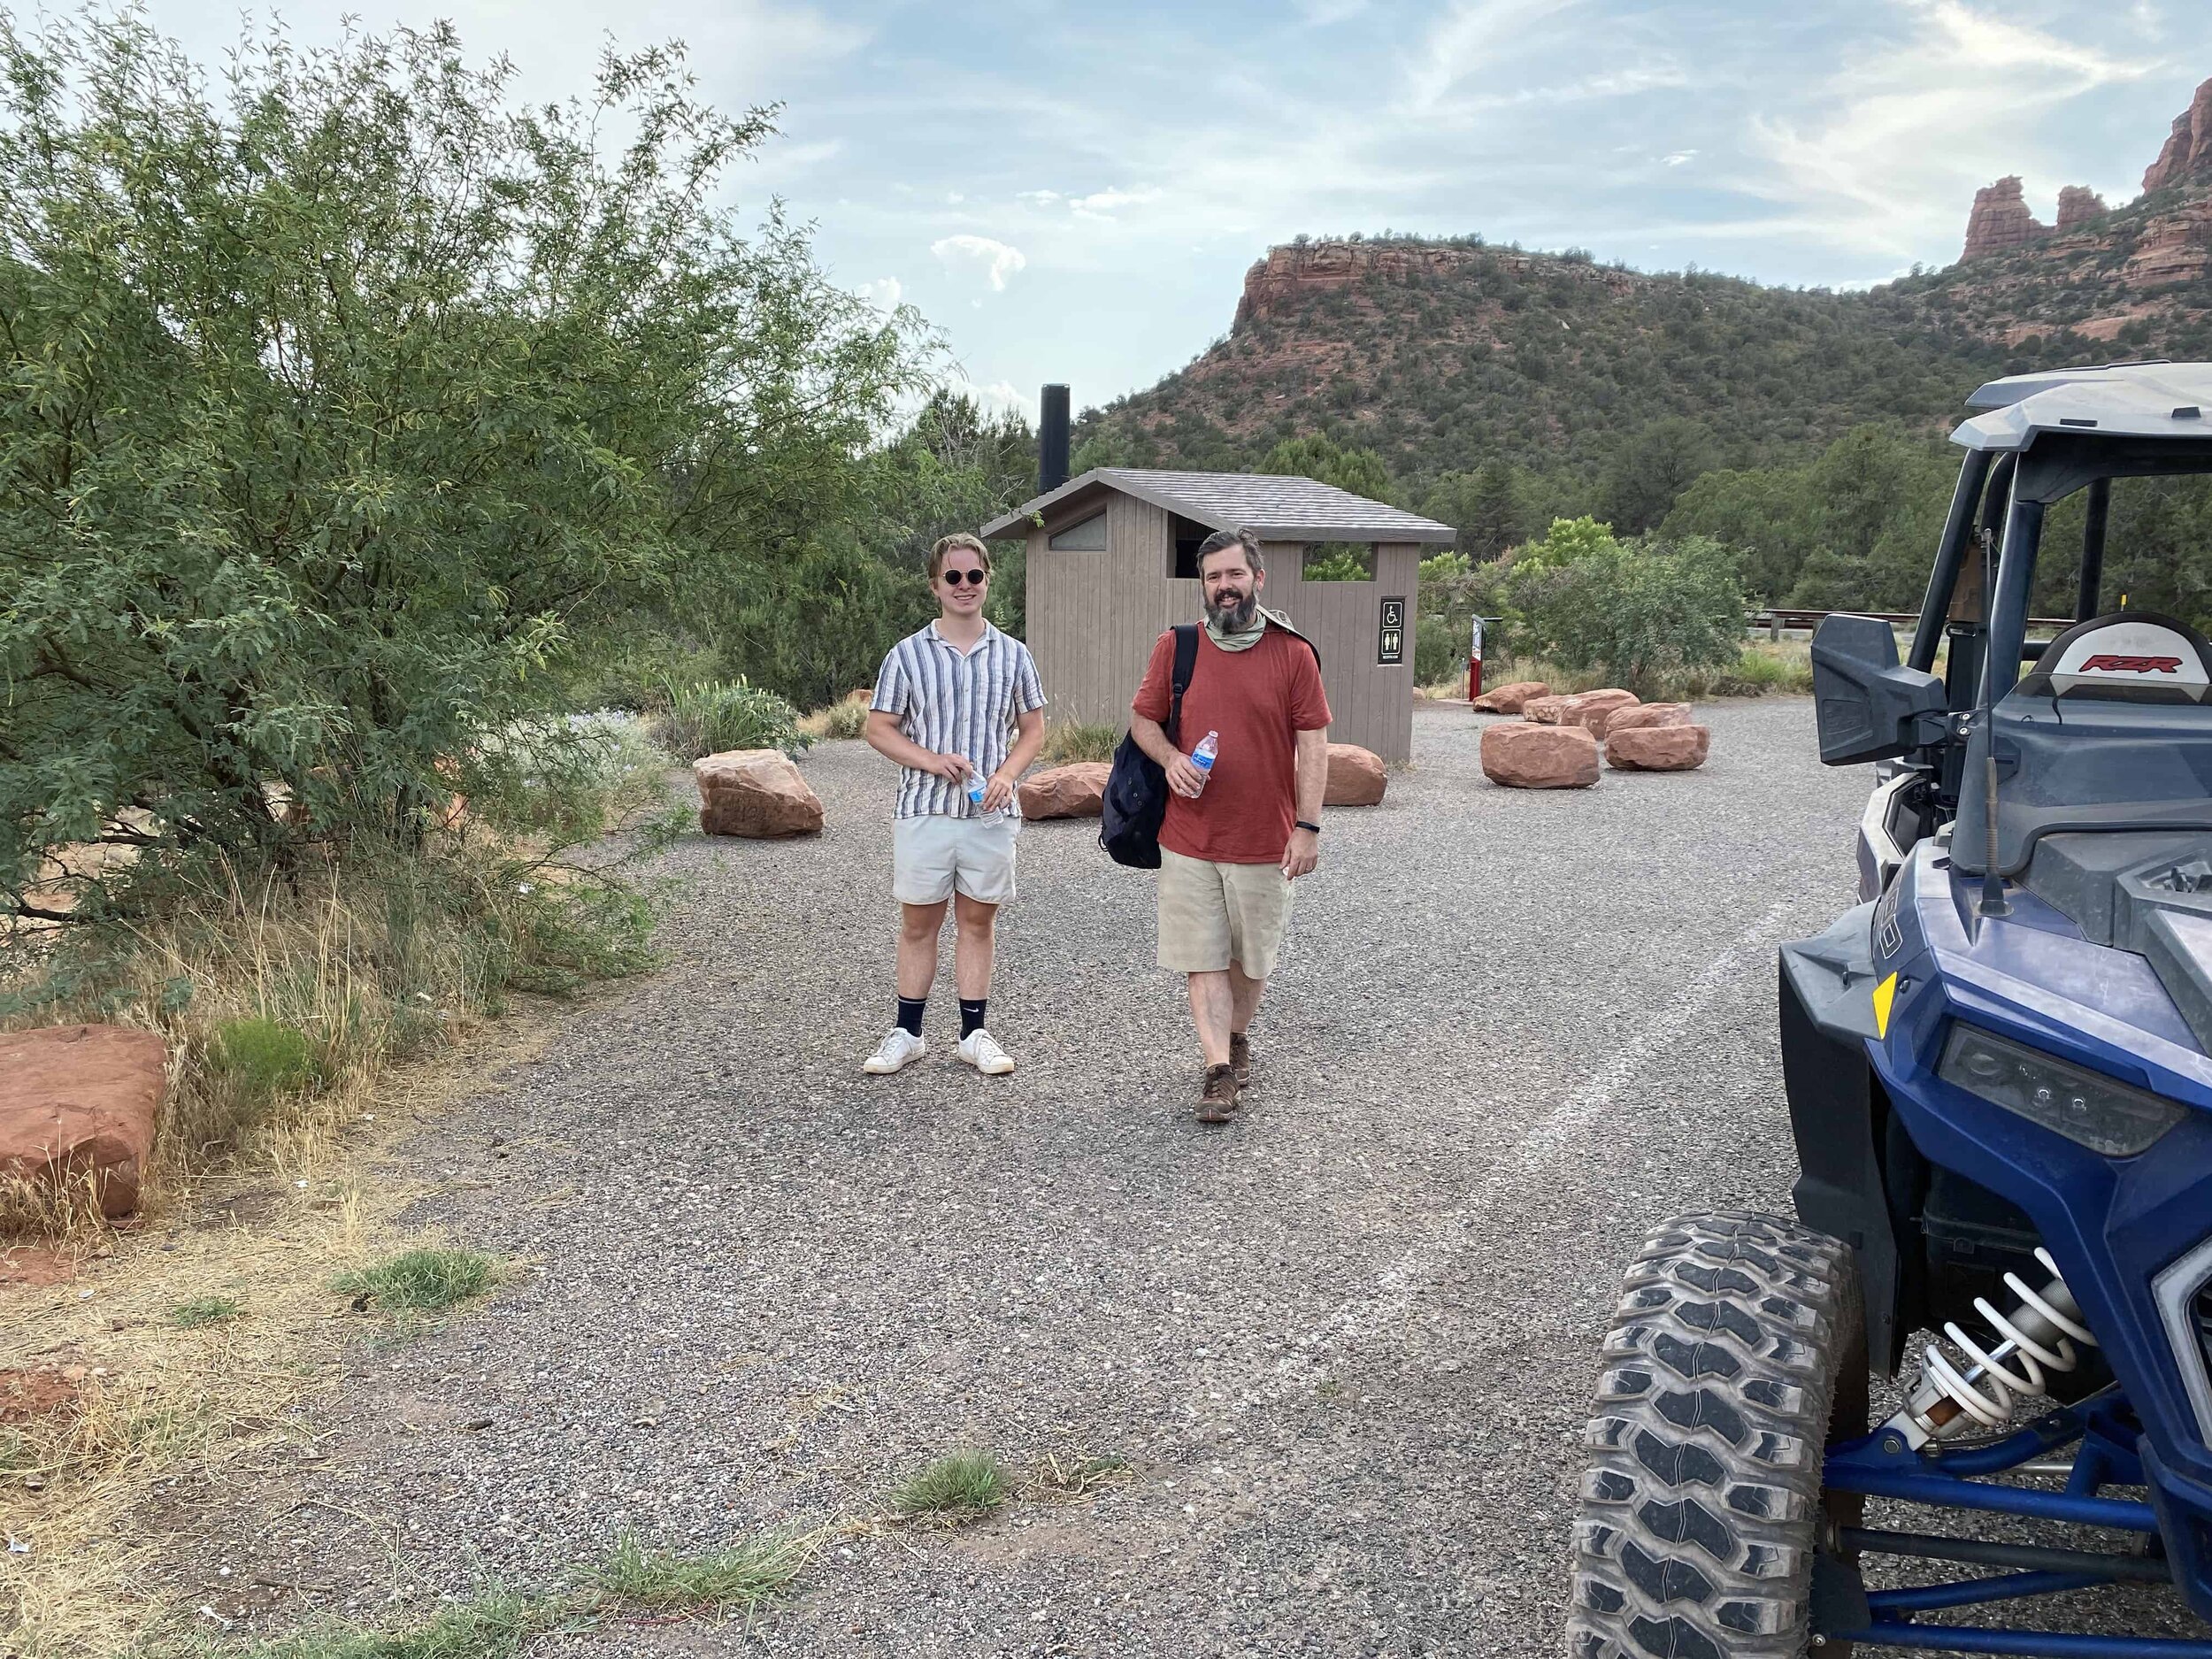 Nate-and-Ryan-after-Offroading-in-Sedona.jpg